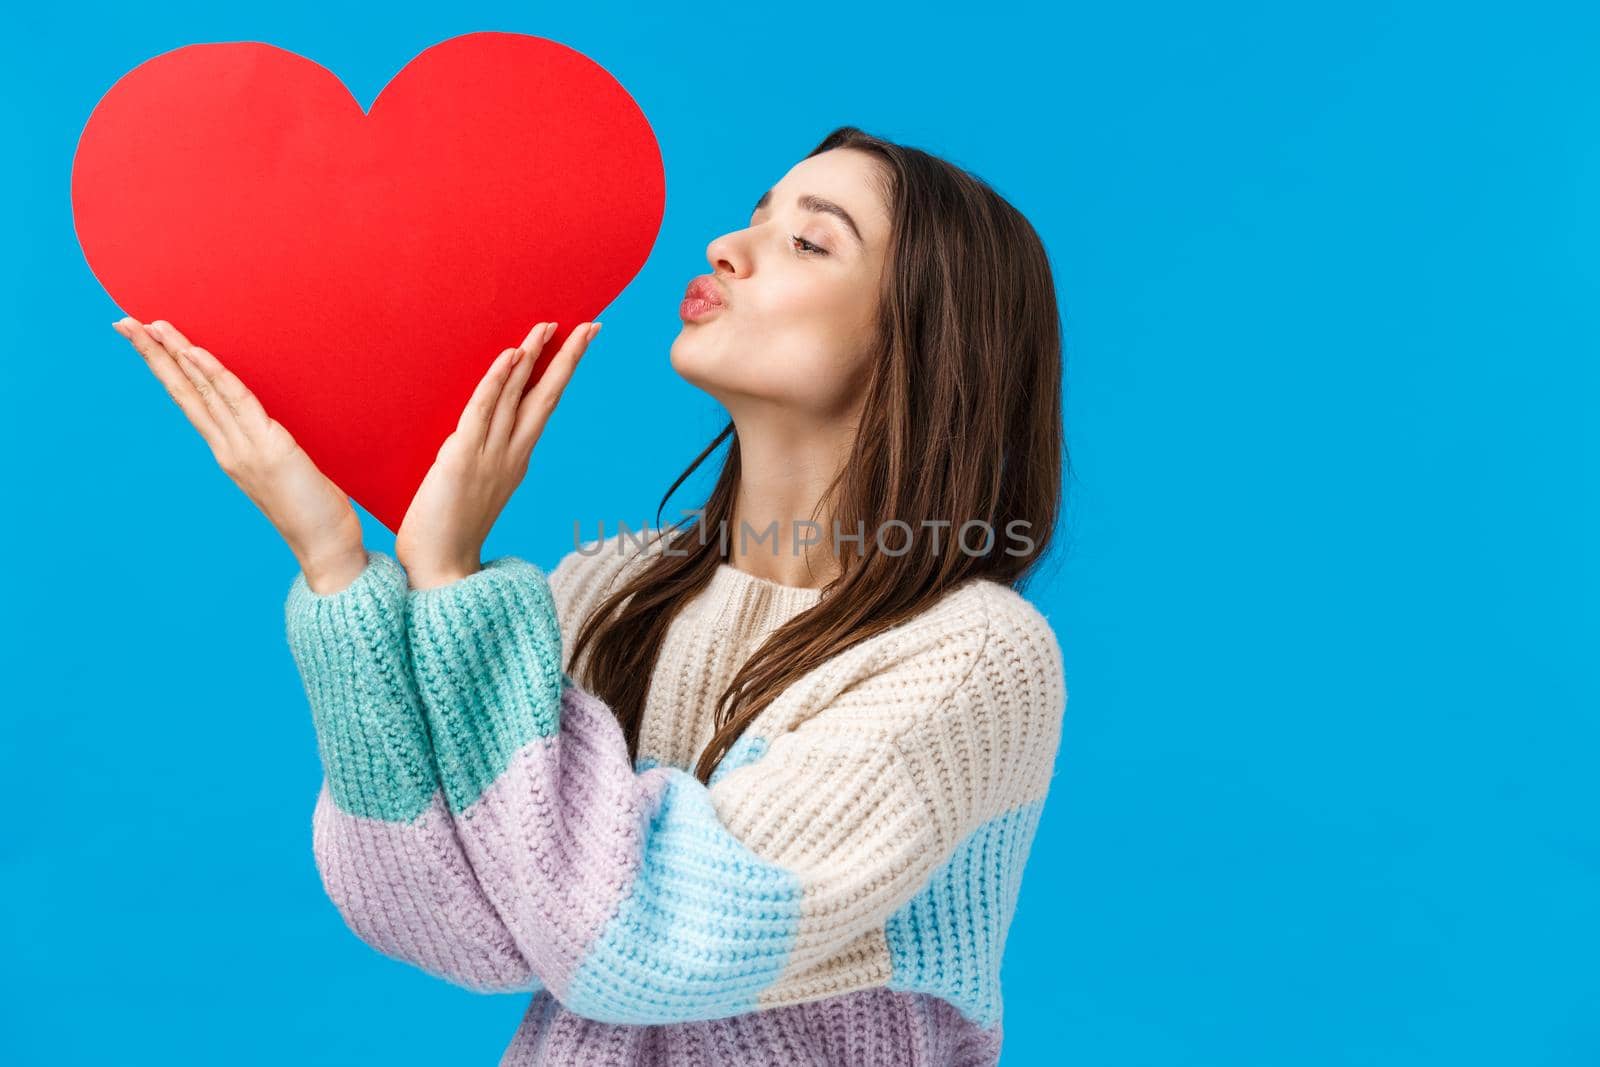 Dreamy young woman cherish her relationship, prepare valentines day gift, kissing big cute red heart sign over left side copy space, standing blue background delighted and upbeat.